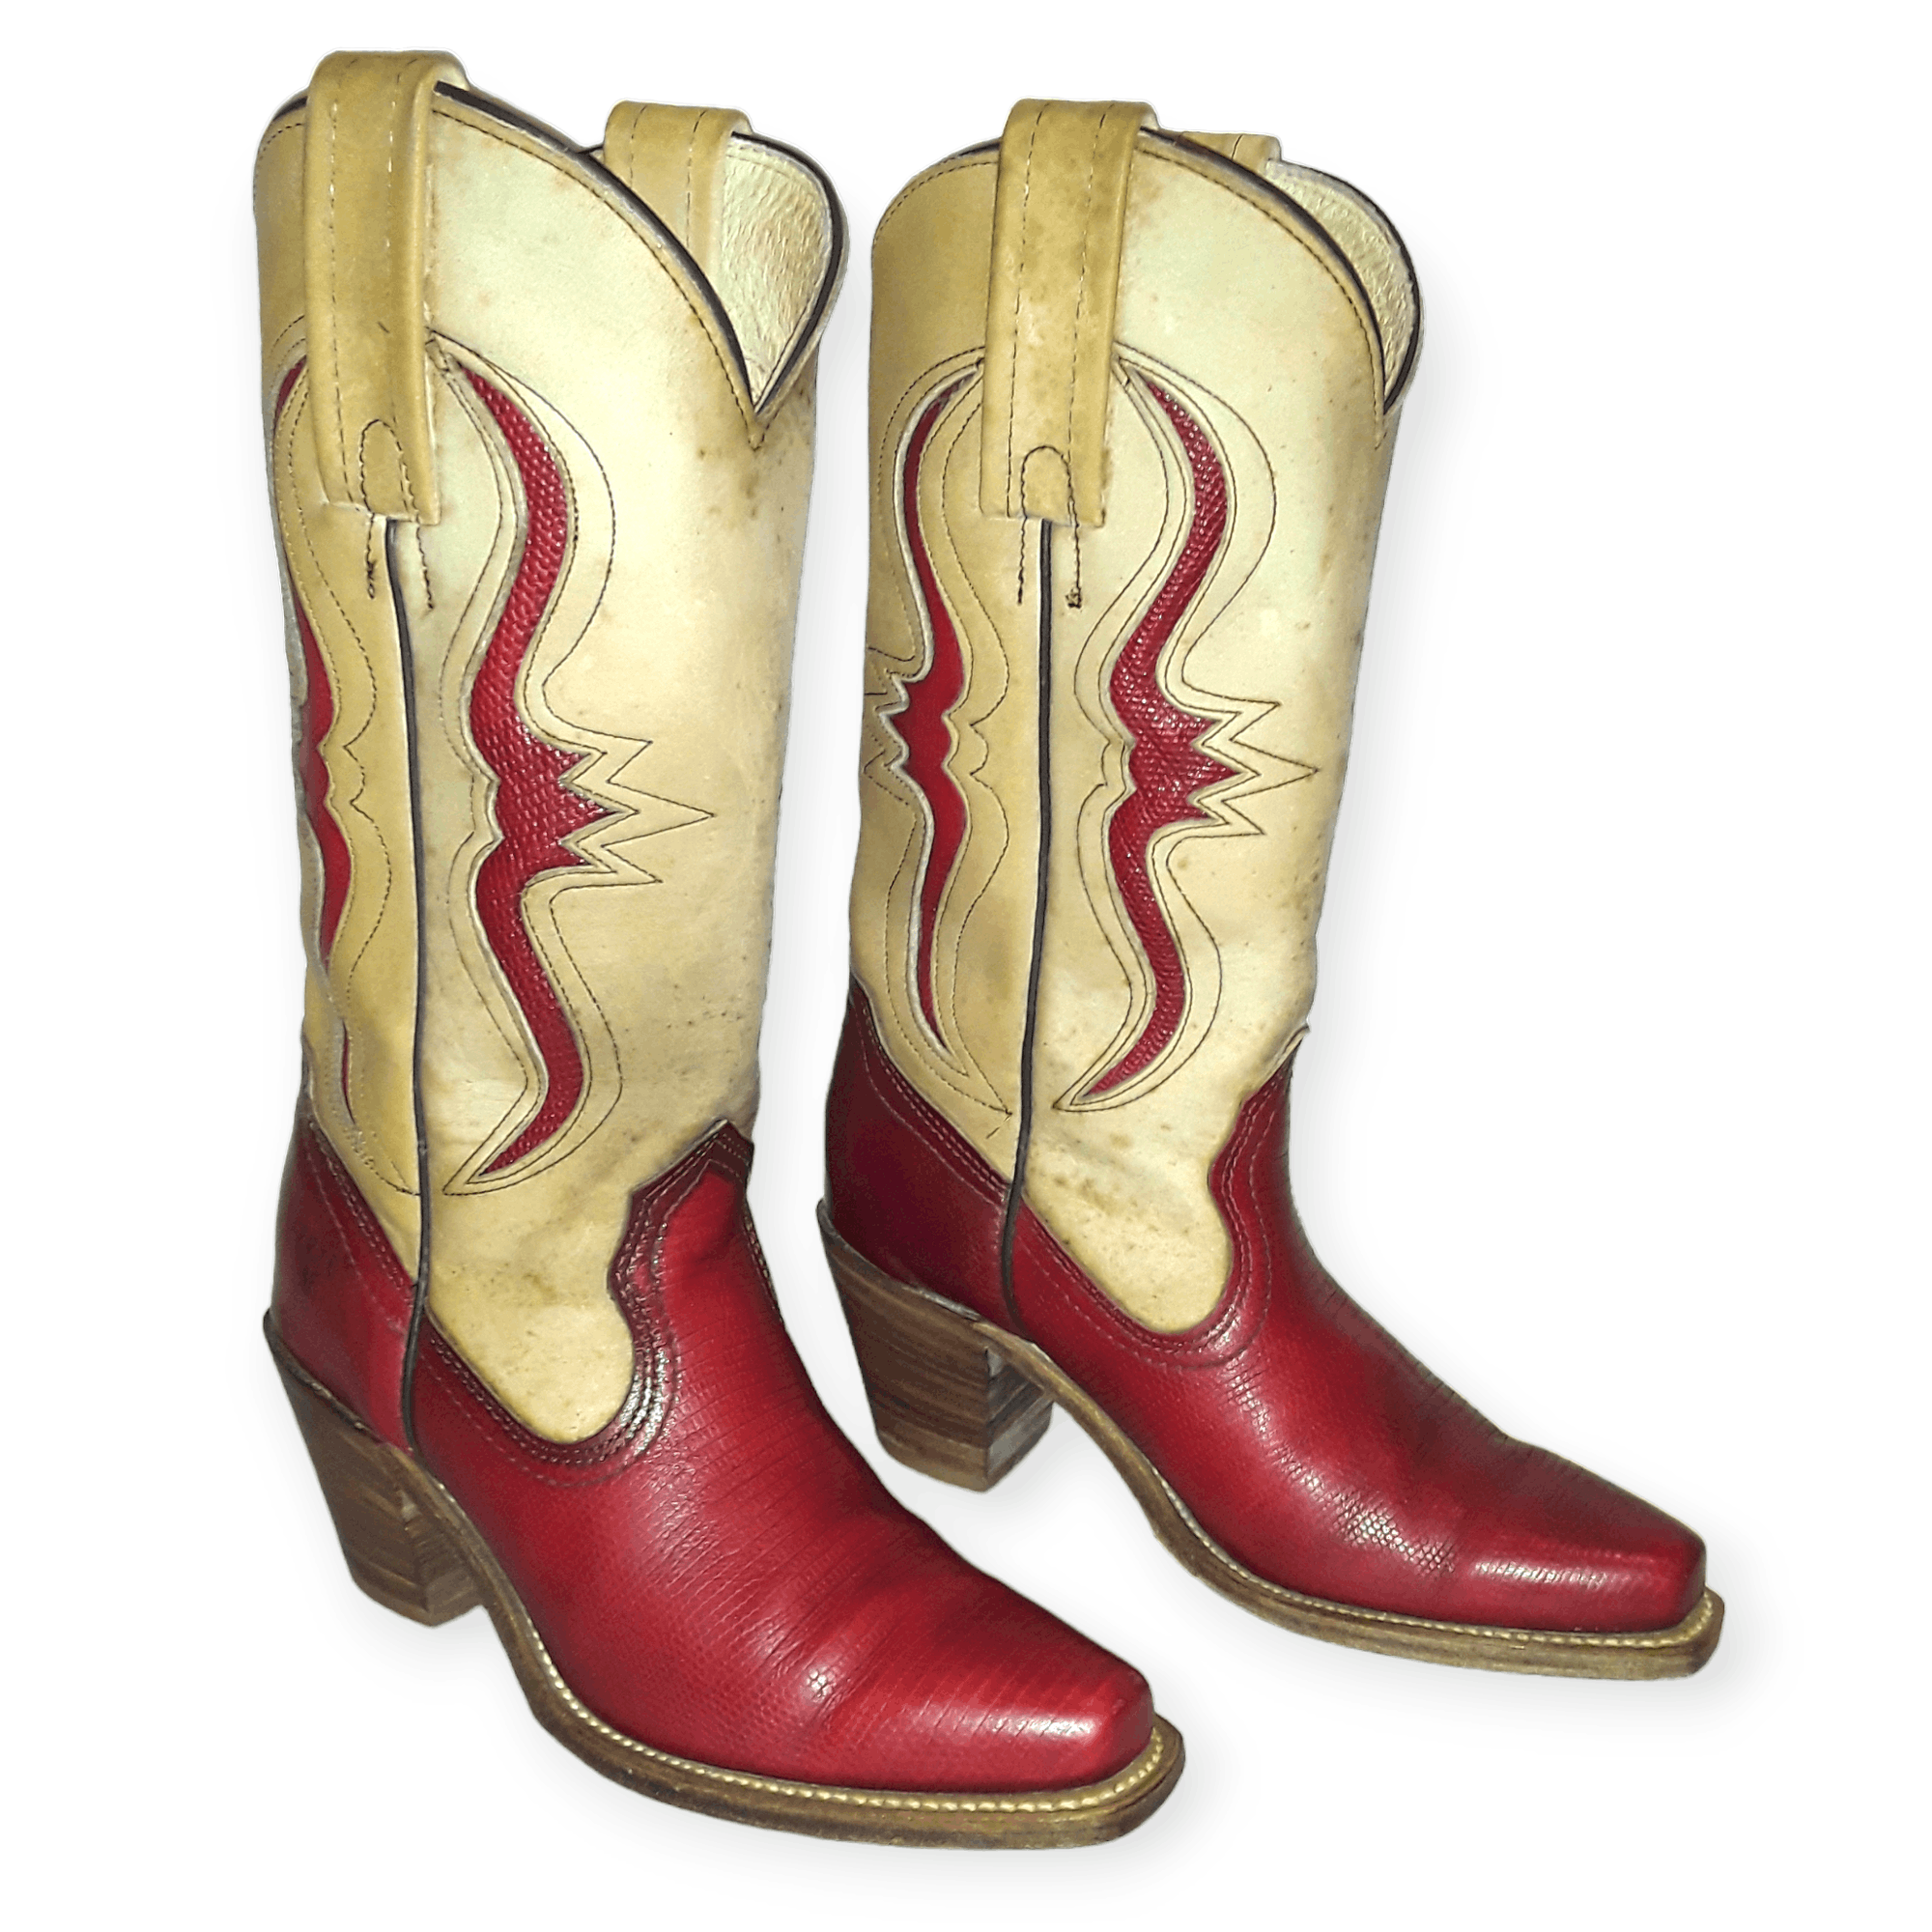 Vintage Vtg Frye Leather Cowgirl Western Boots Size 5.5 B USA Made Size US 5.5 / IT 35.5 - 1 Preview